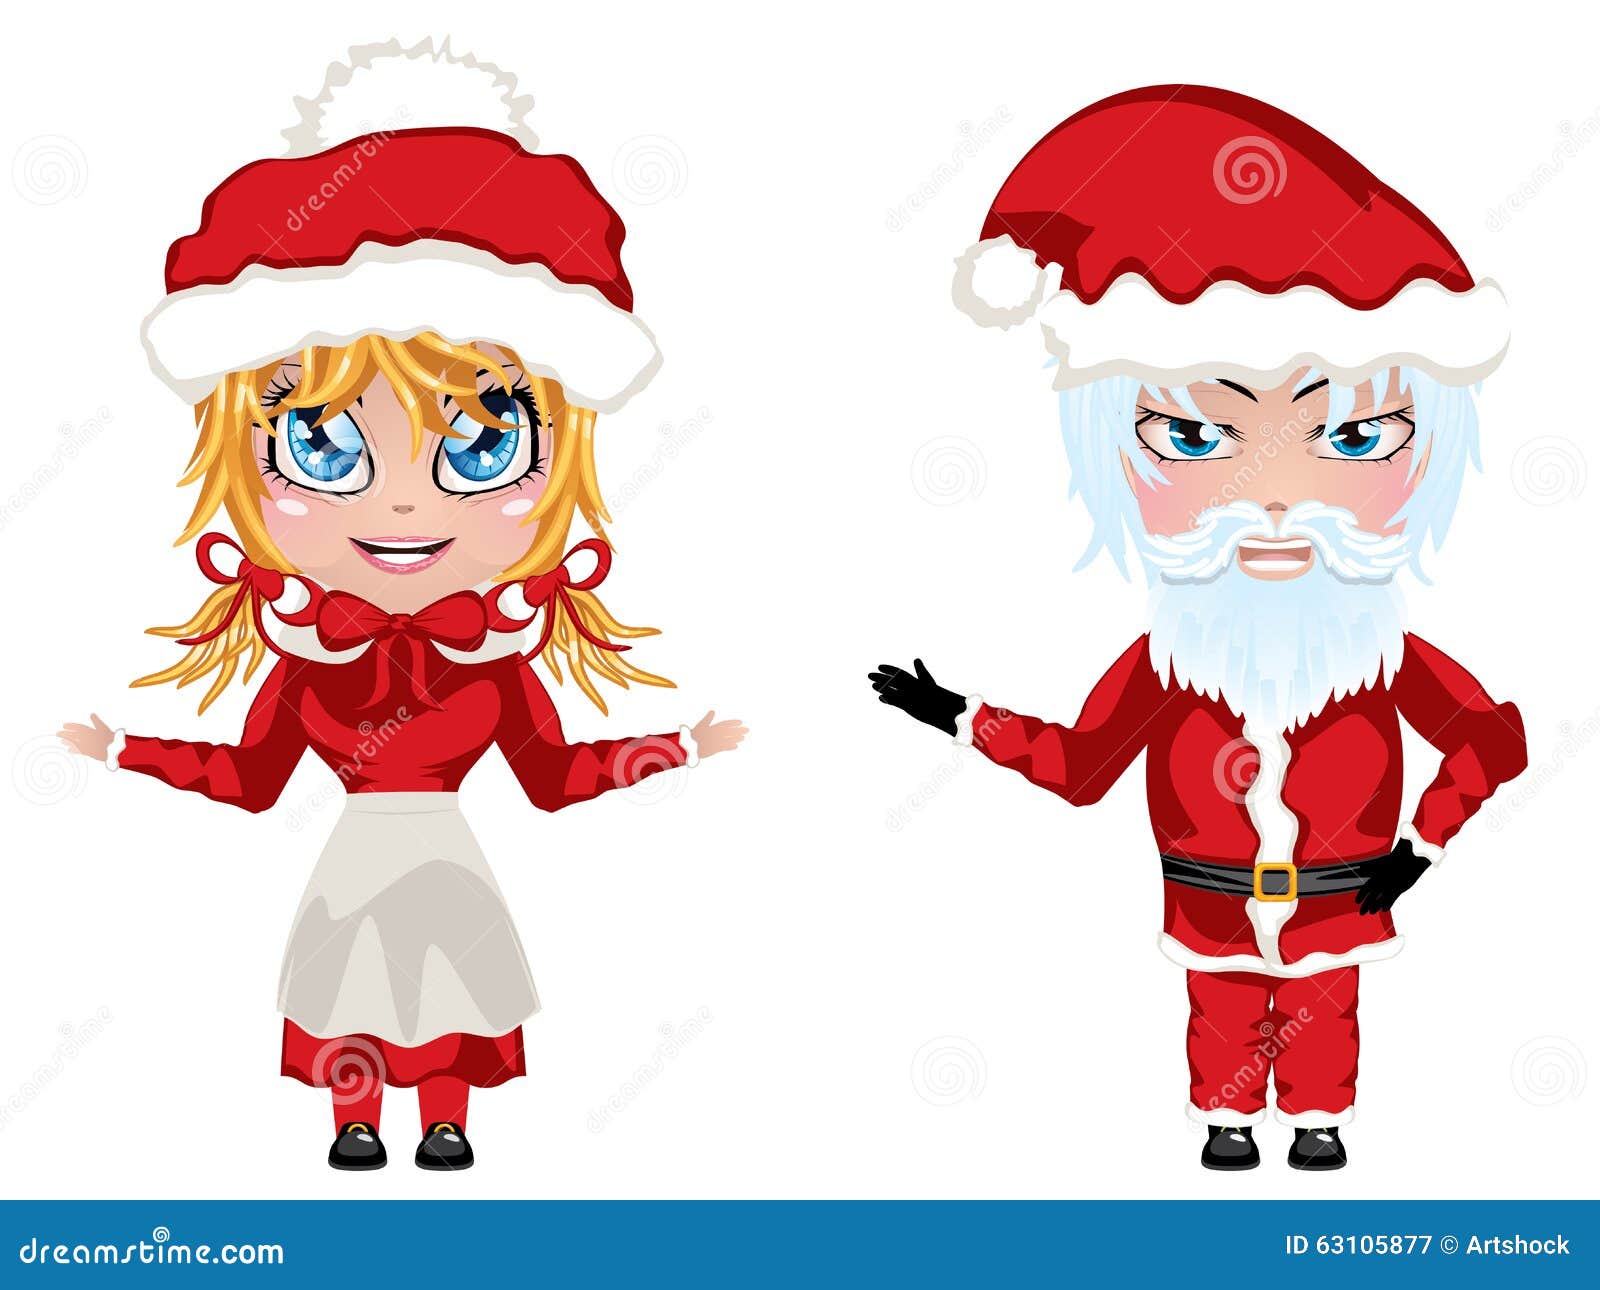 Santa and Mrs Claus stock vector. Illustration of mustache - 63105877